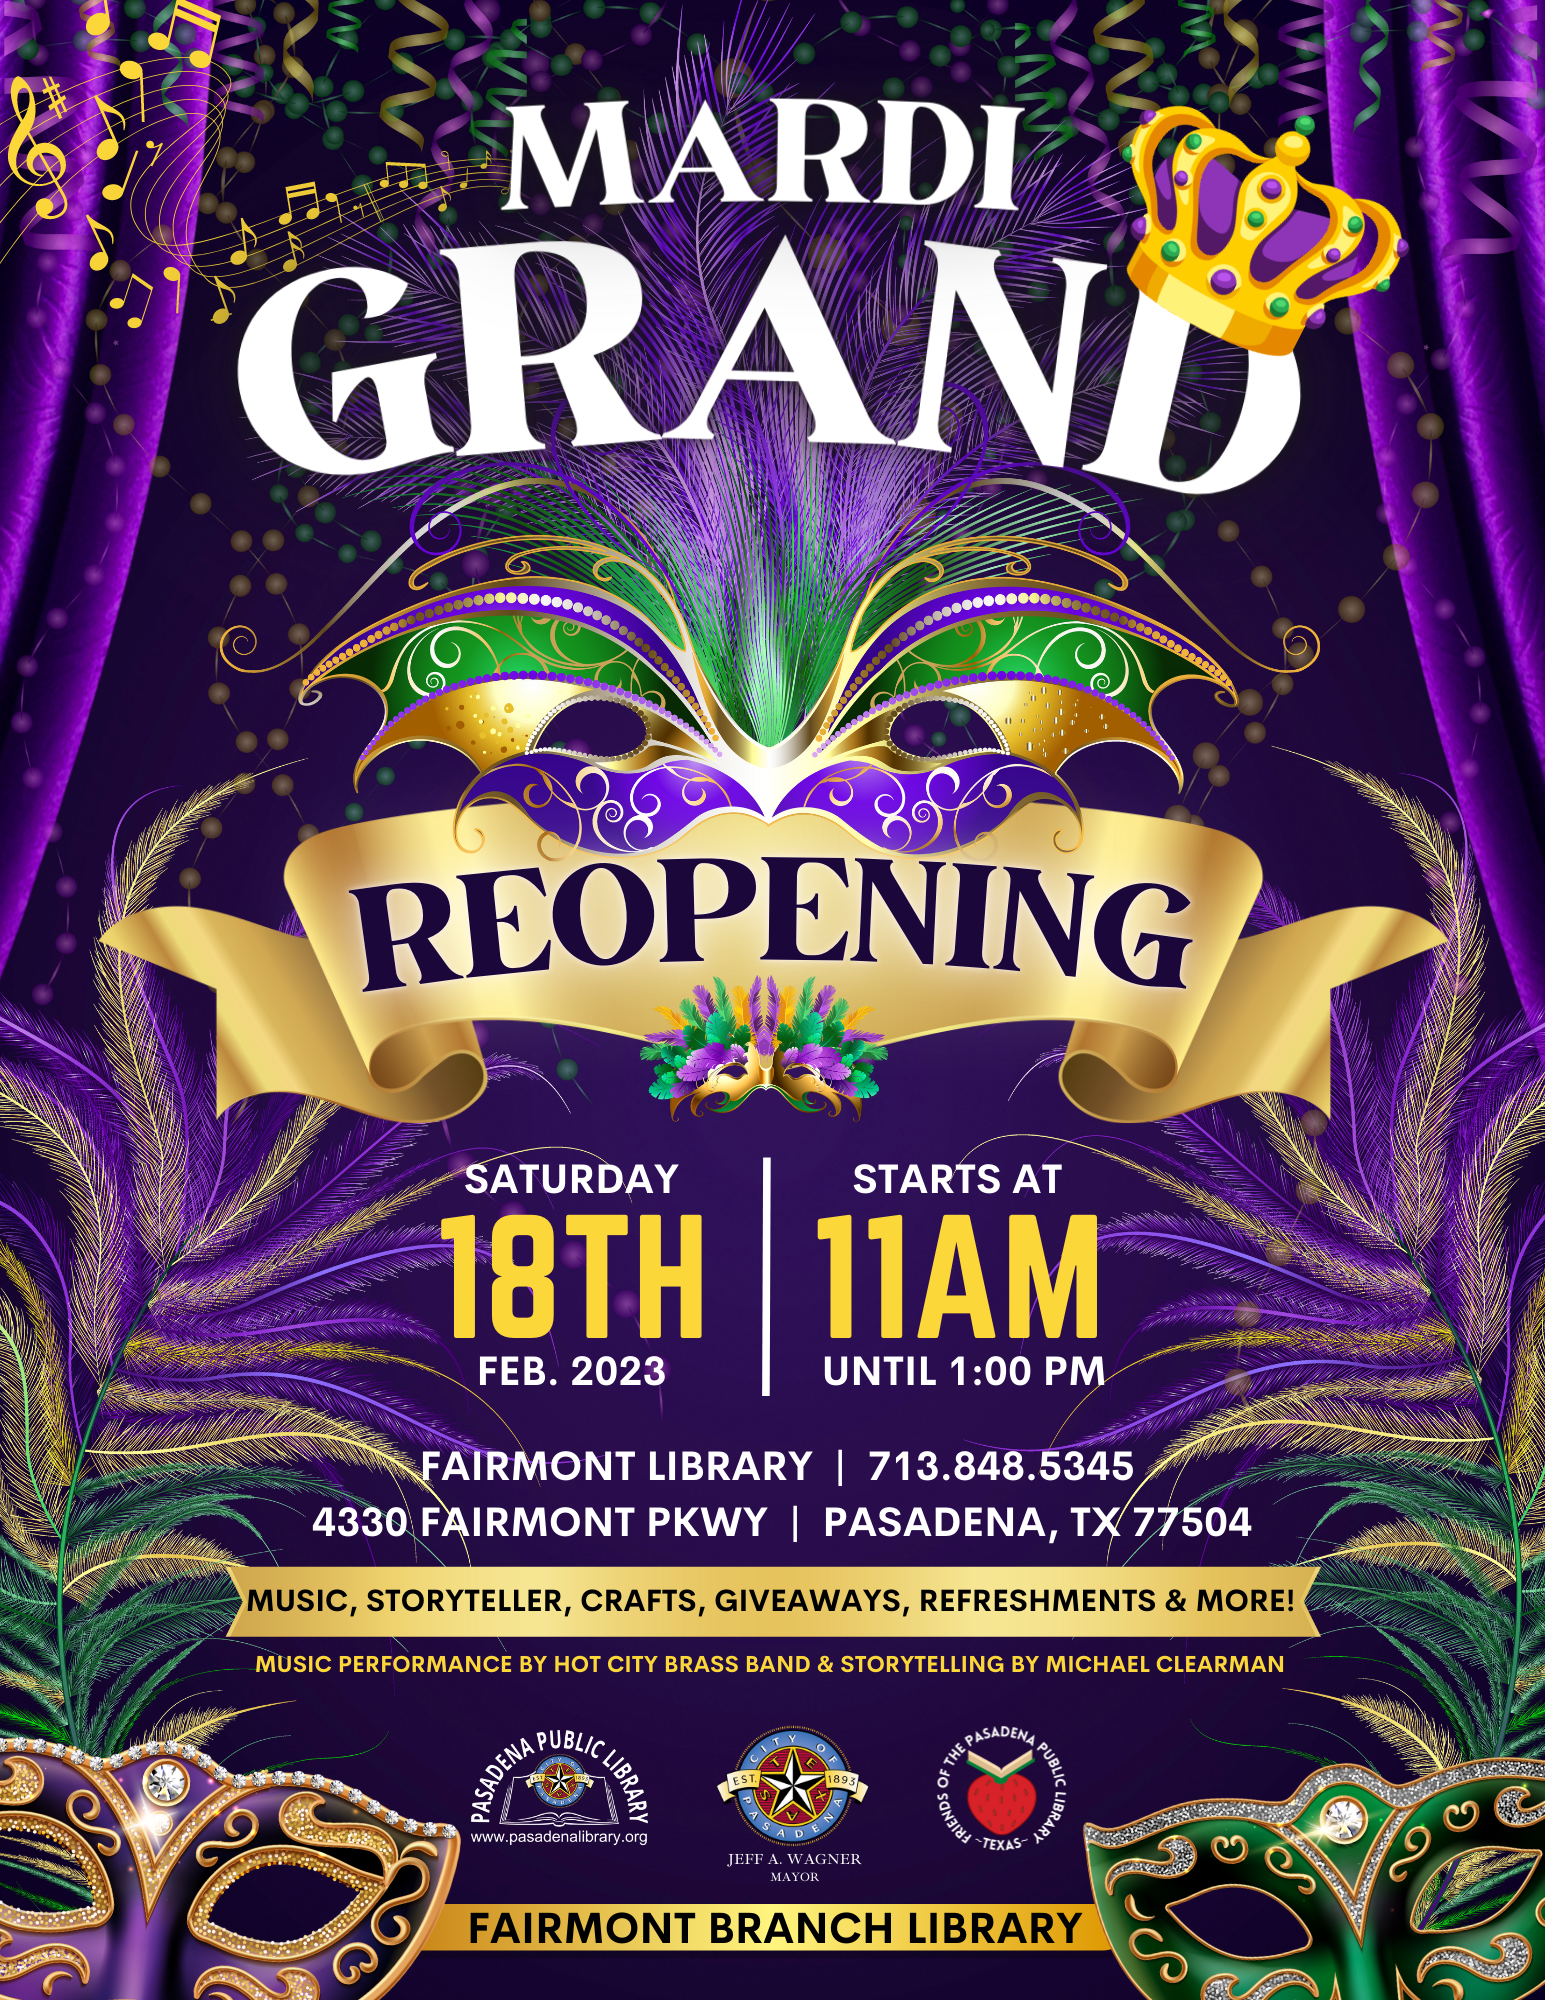 It's time to get jazzy and get this Mardi started!  Come celebrate Fairmont Library's Mardi-Grand Reopening on Saturday, February 18, 2023 from 11:00 AM to 1:00 PM.